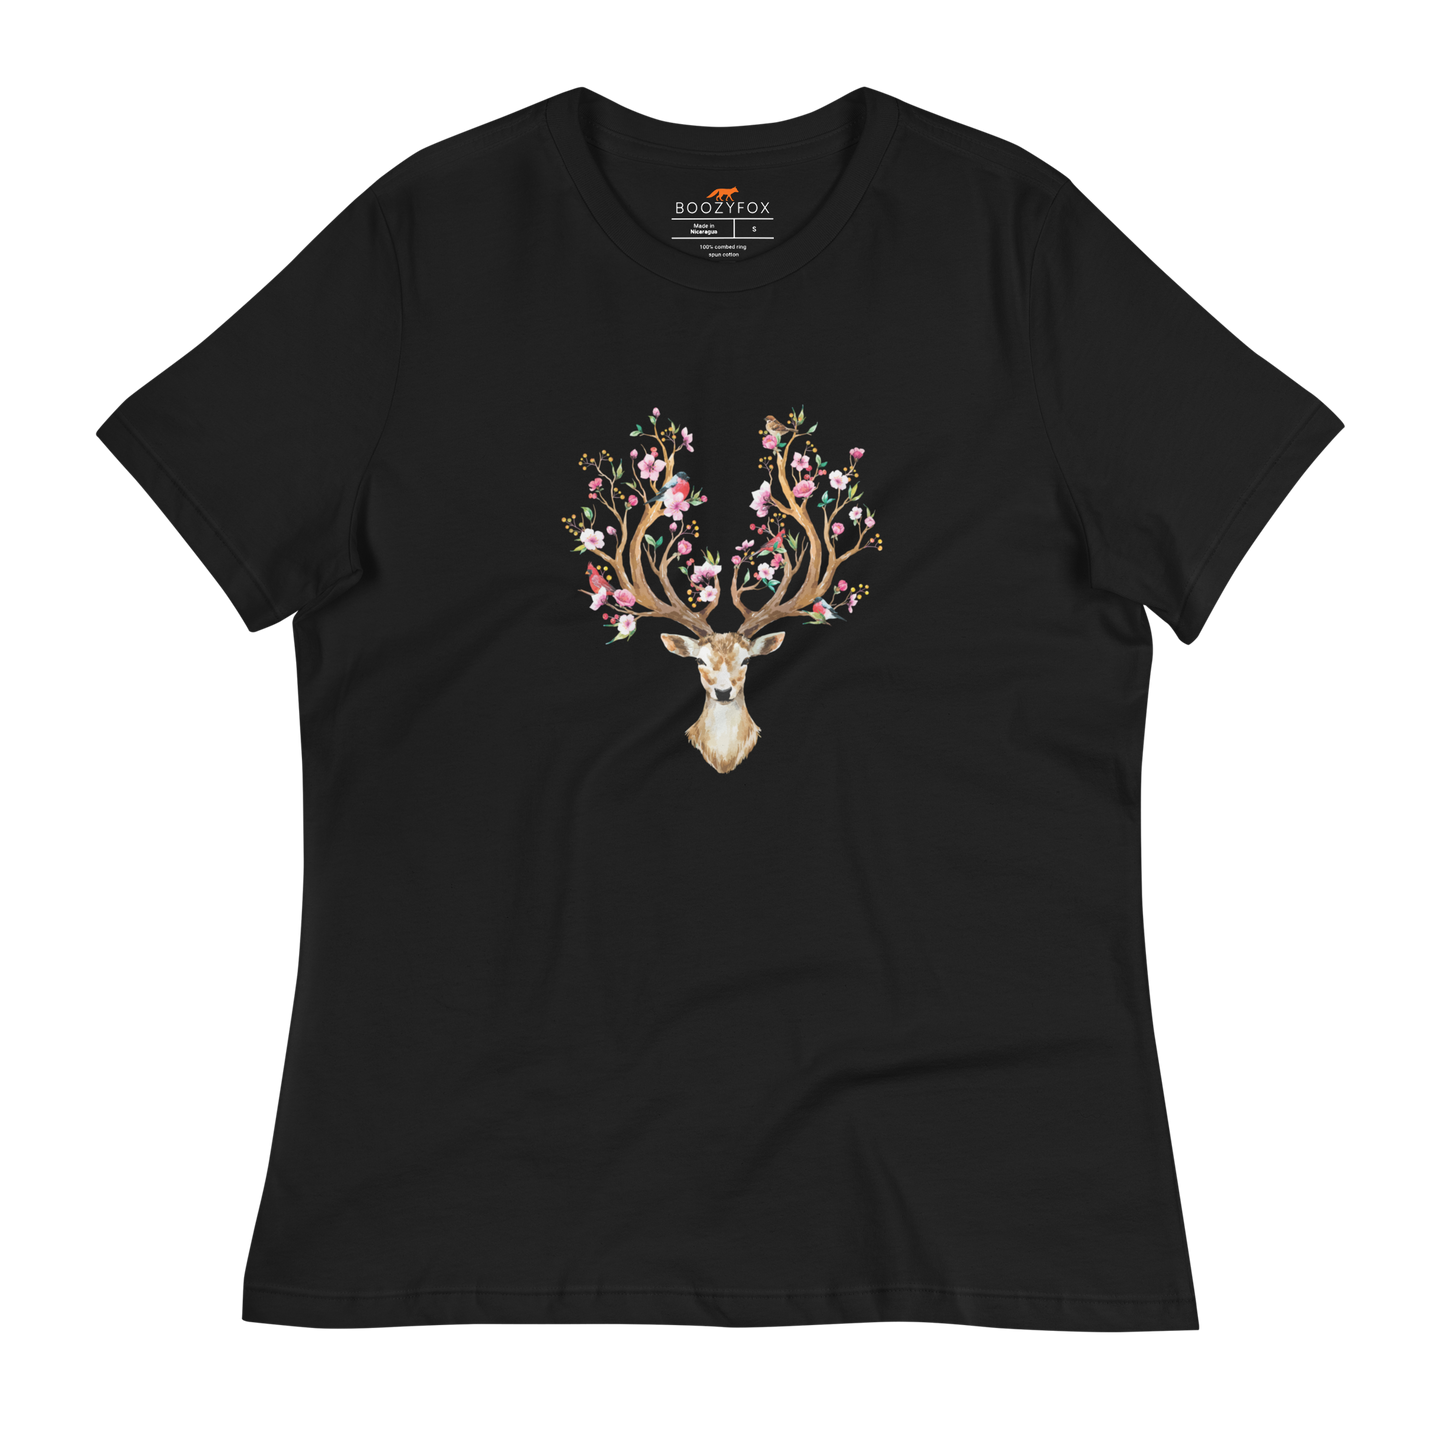 Women's relaxed black Deer t-shirt featuring an eye-catching Floral Red Deer graphic on the chest - Women's Graphic Deer Tees - Boozy Fox